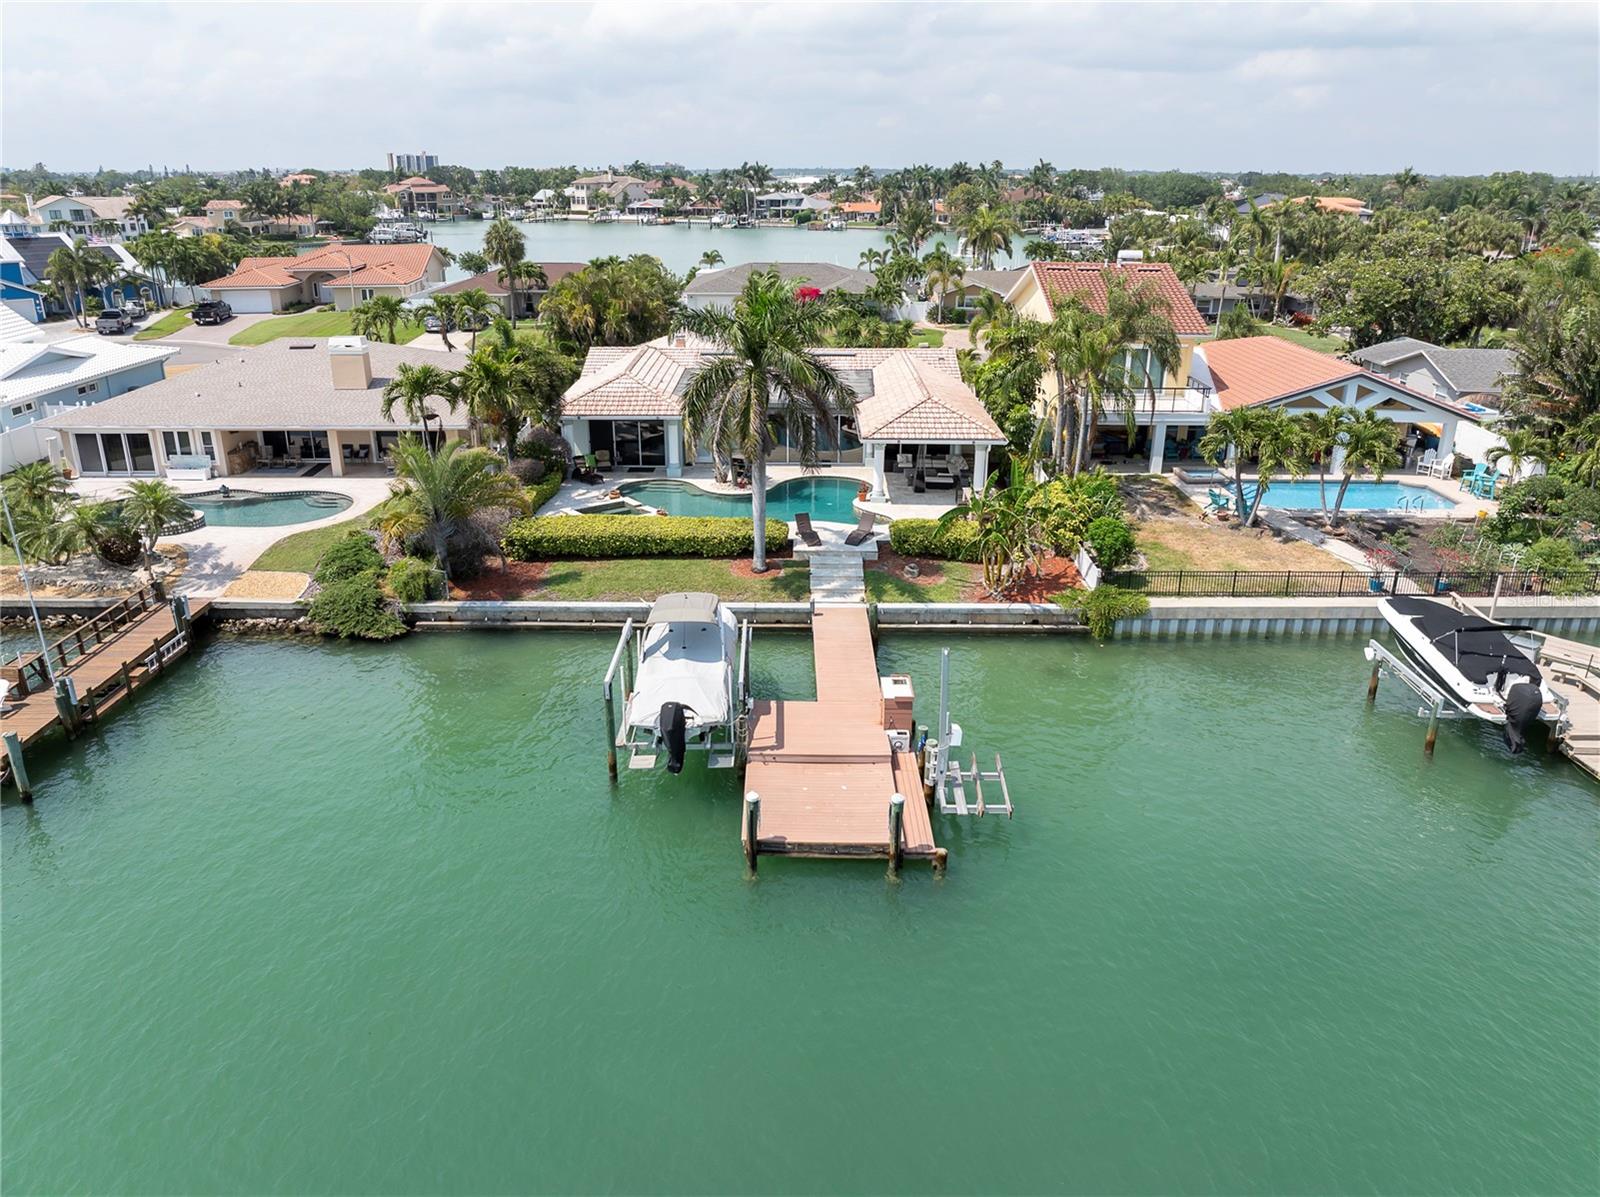 Aerial view of Back of House Pool and Boat Dock